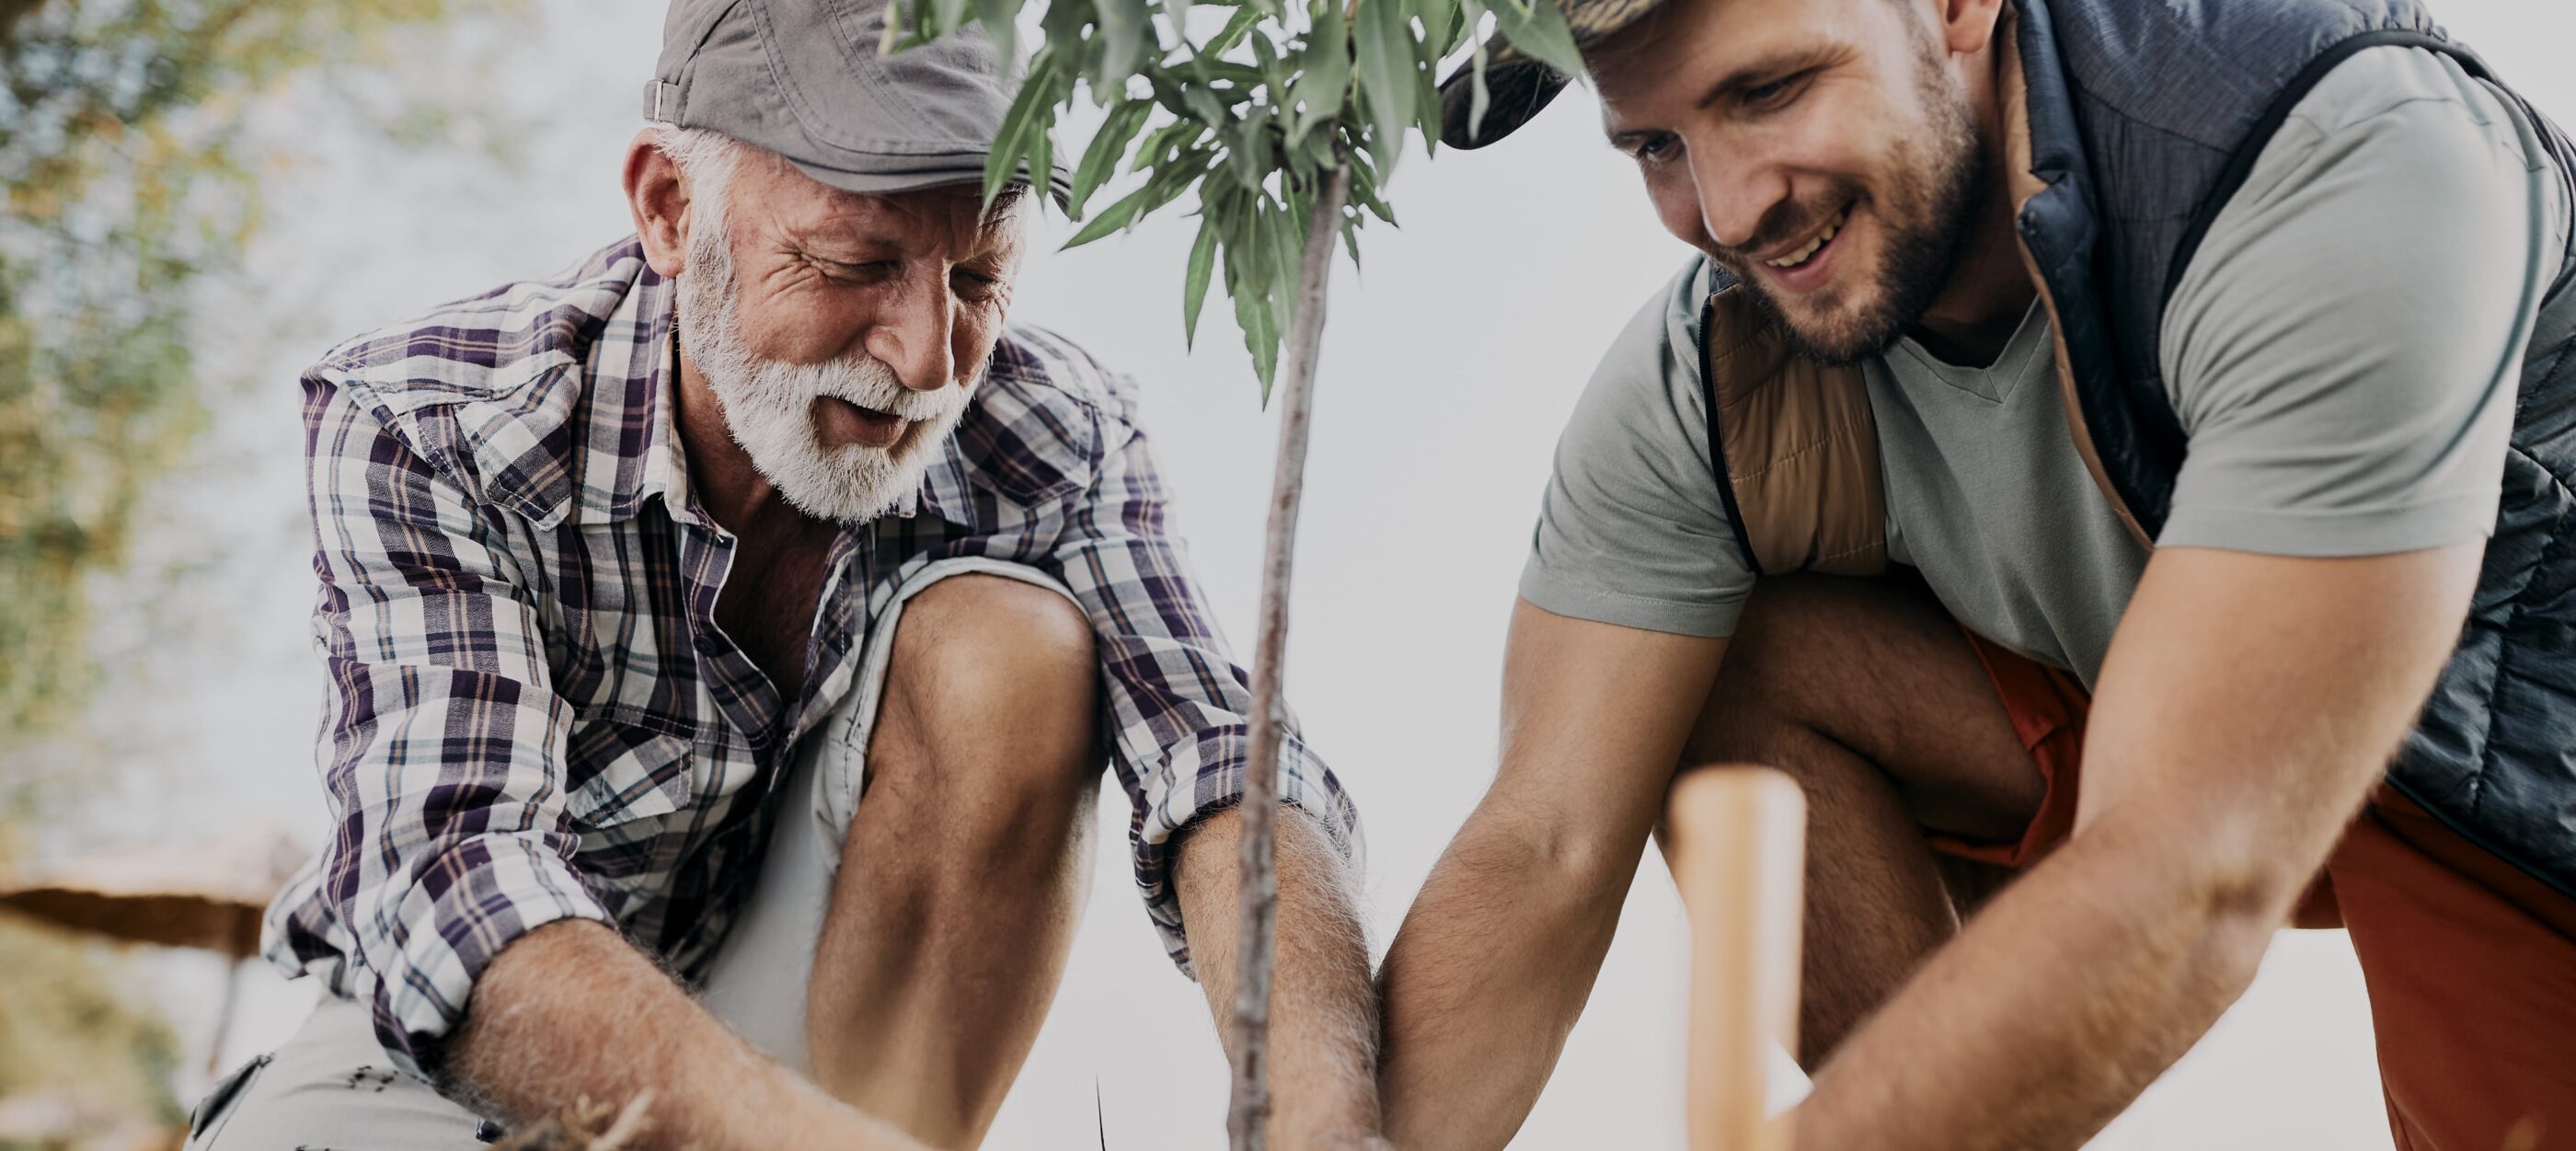 An elderly man with a grey beard and a young man smiling together while planting a sapling in a garden, symbolizing the nurturing of life and memories in a backyard memorial.